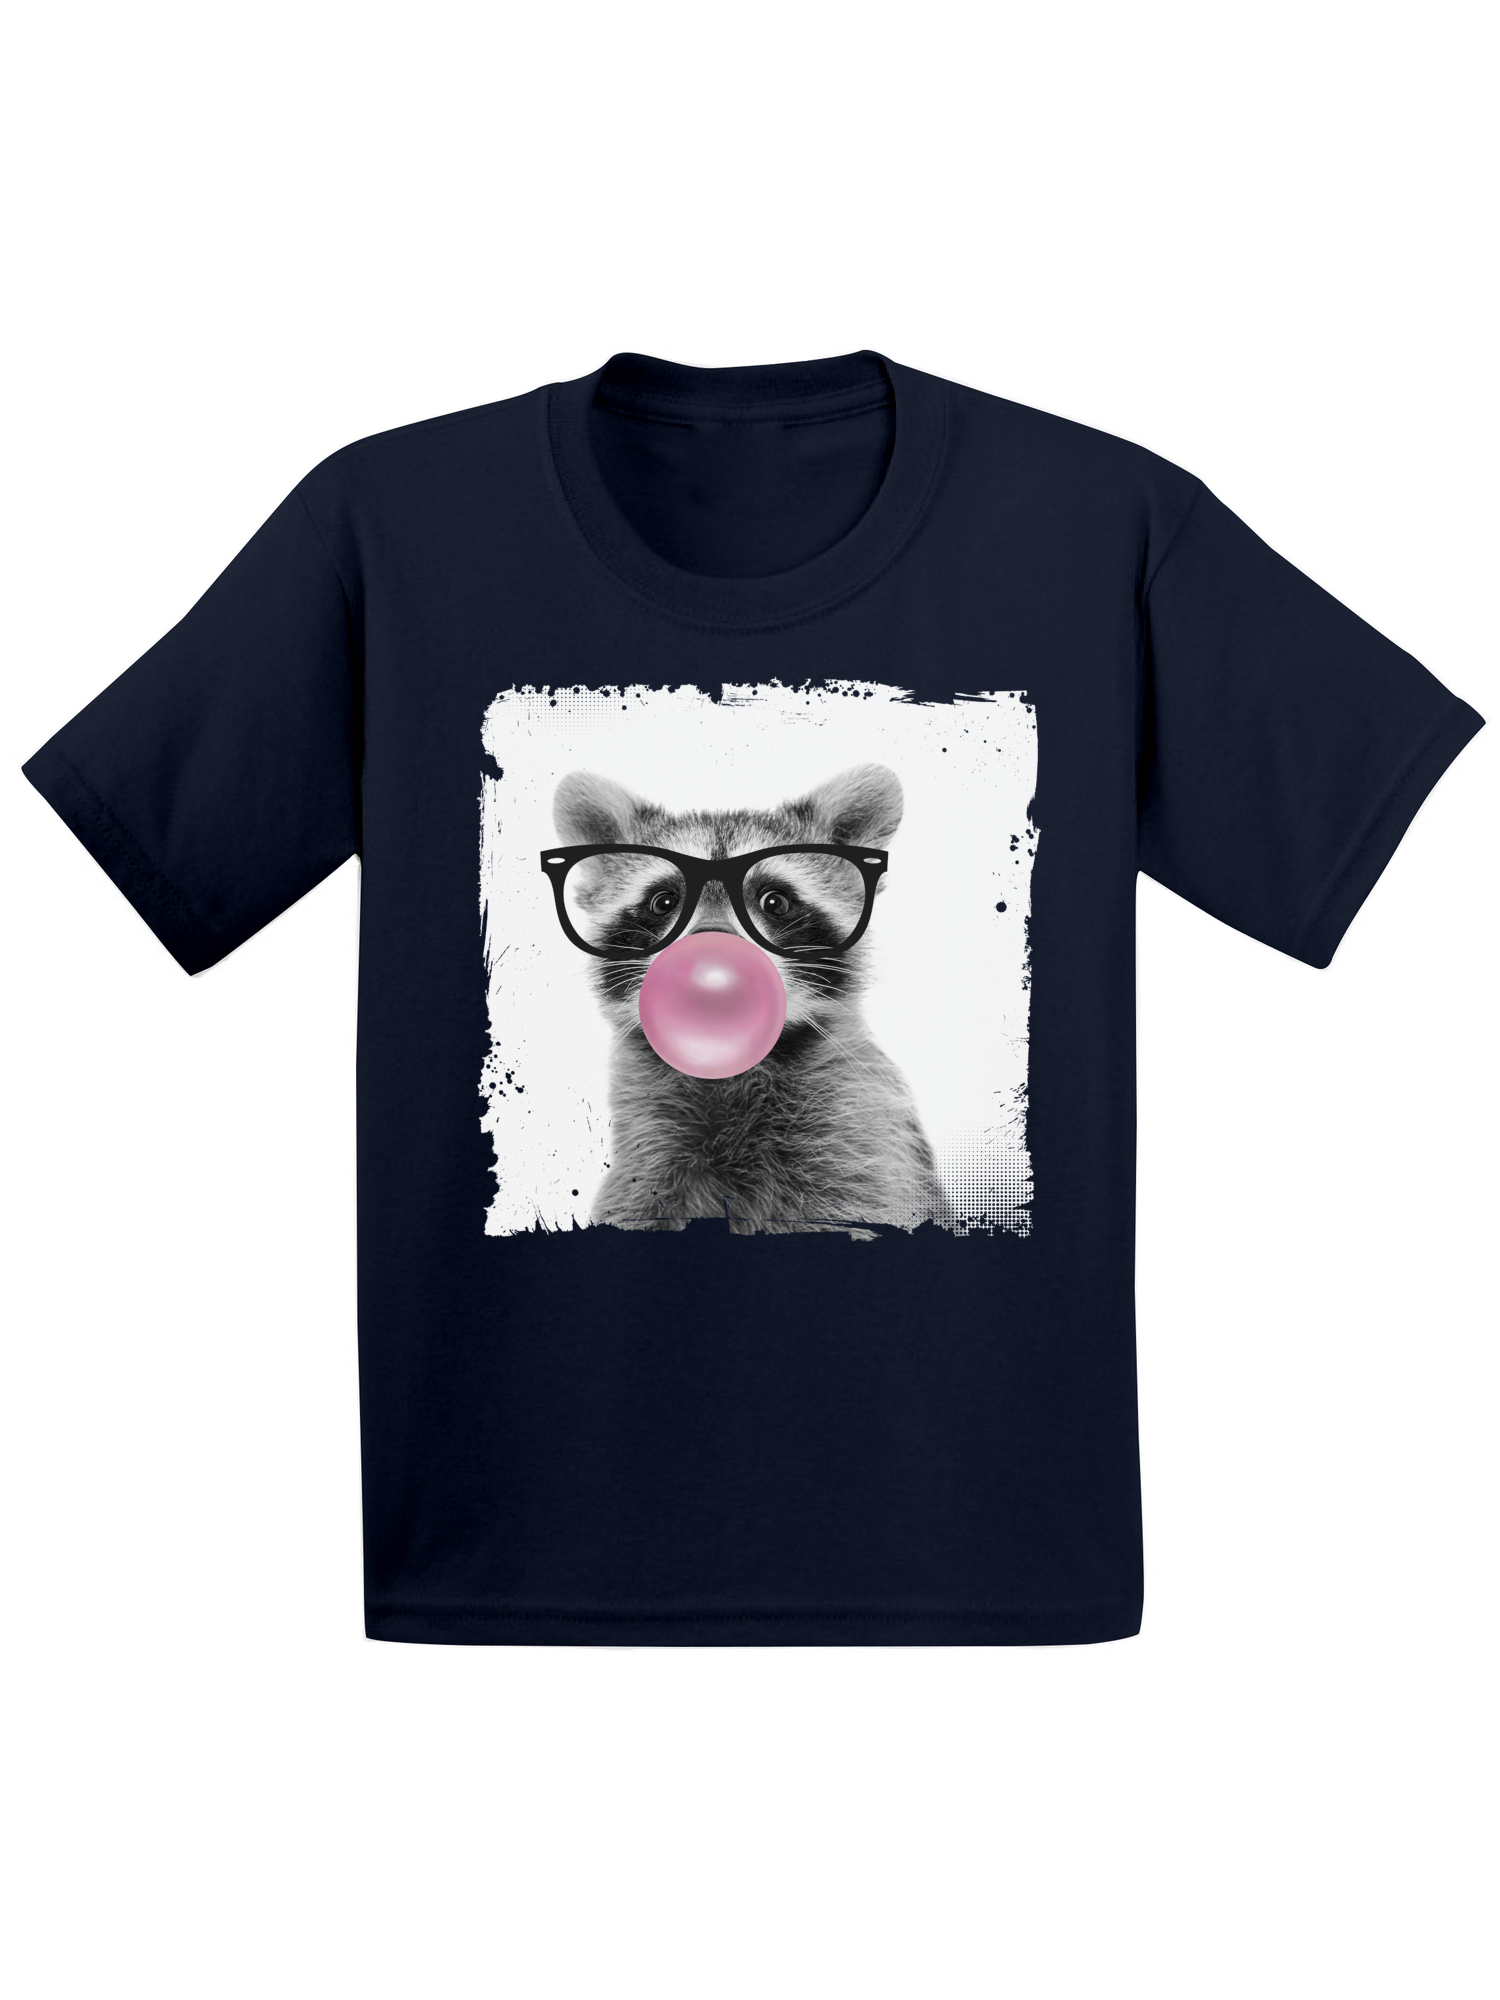 Awkward Styles New Animal Collection Funny Raccoon with Gum Raccoon Clothing Raccoon Lovers Funny Gifts for Kids Childrens Outfit Raccoon Tshirt Raccoon Toddler Shirt Toddler T Shirt for Kids - image 1 of 4